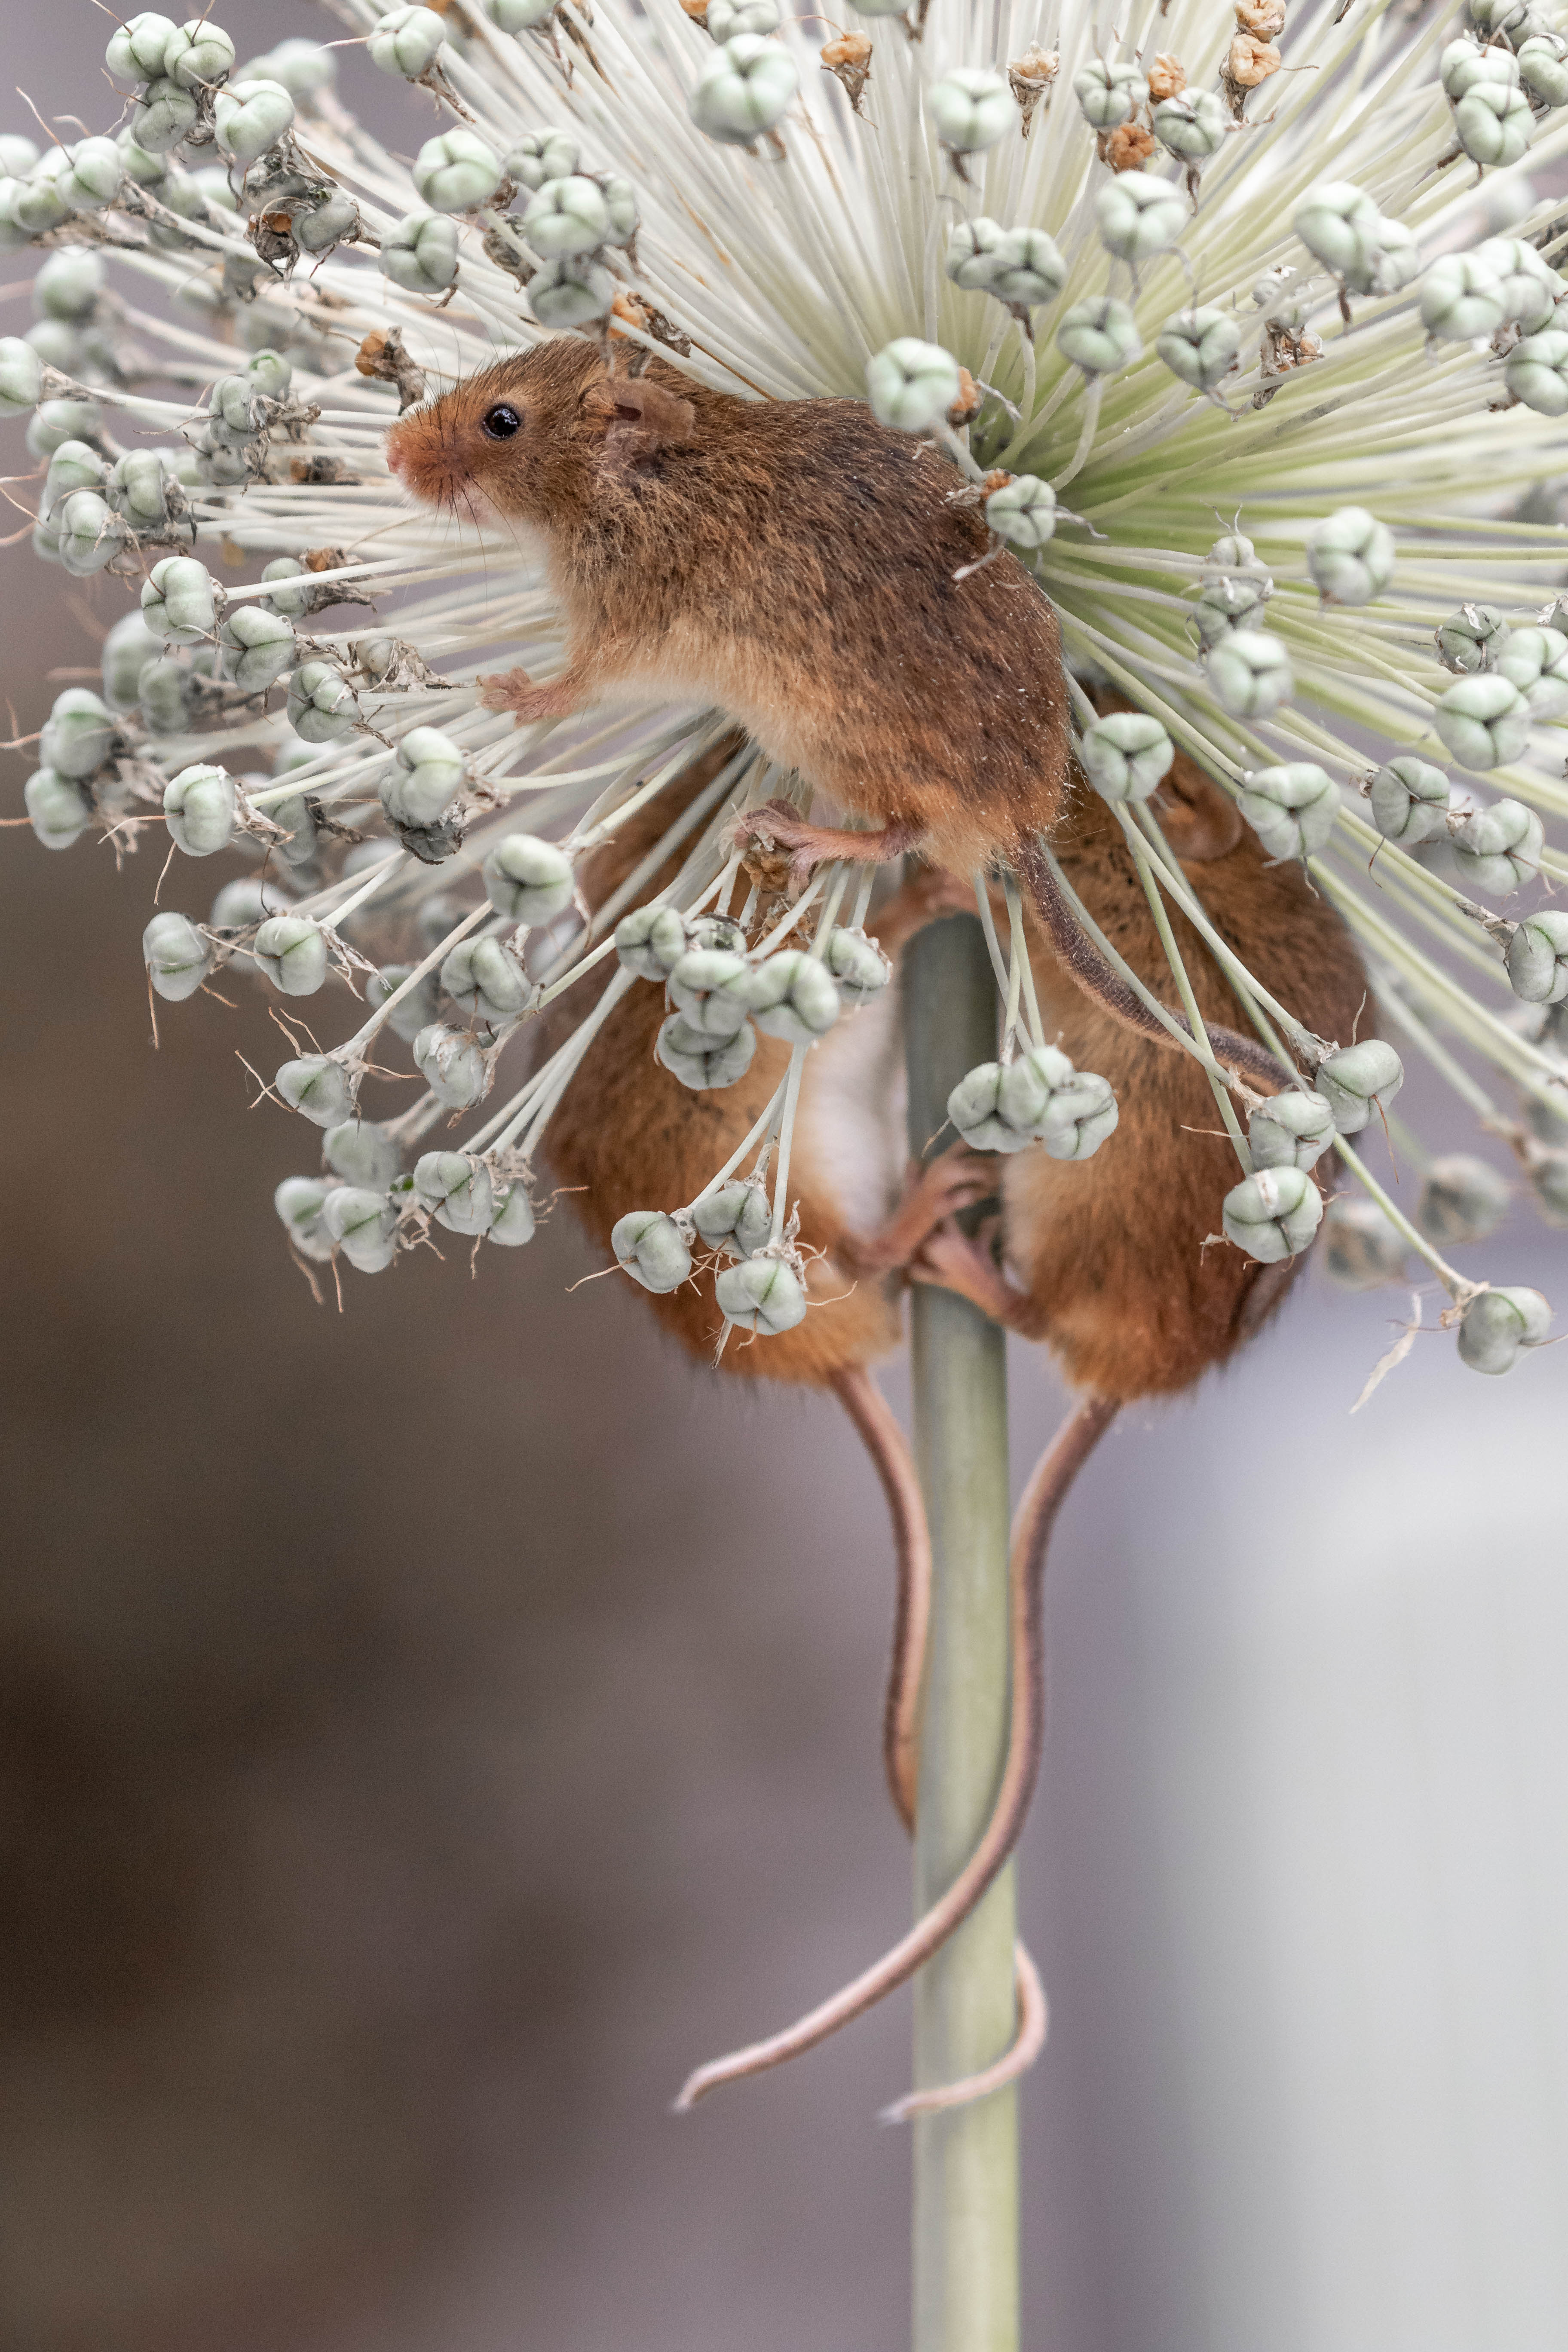 Wallpapers mouse-baby trinity Harvest Mouse on the desktop